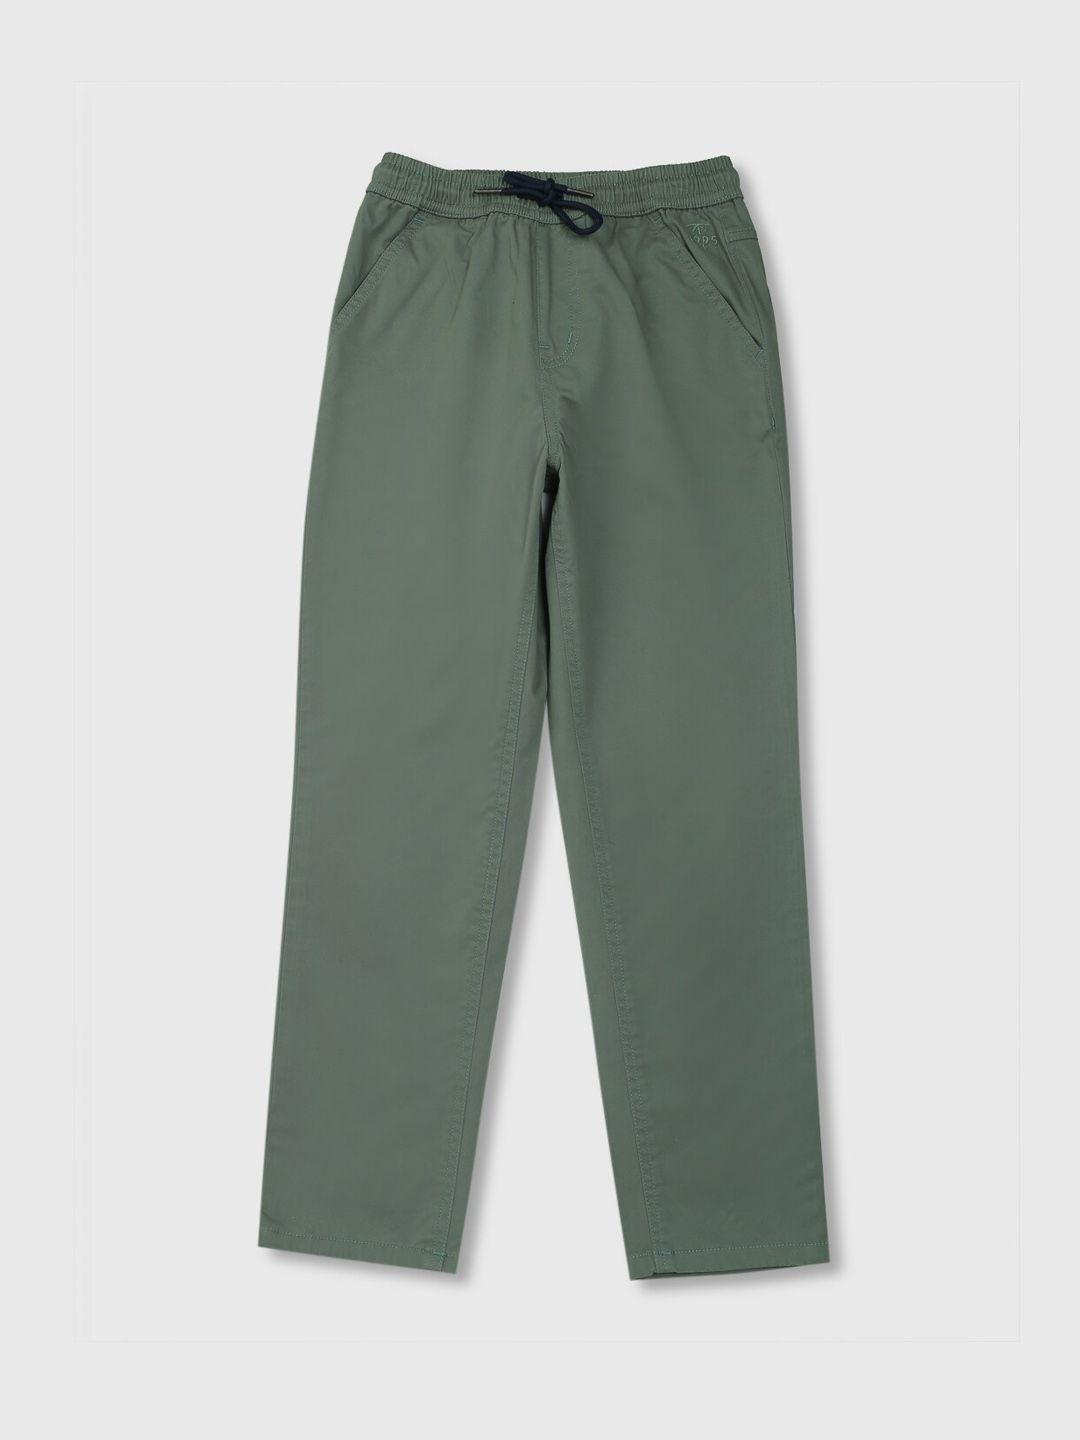 Palm Tree Boys Green Solid Trousers